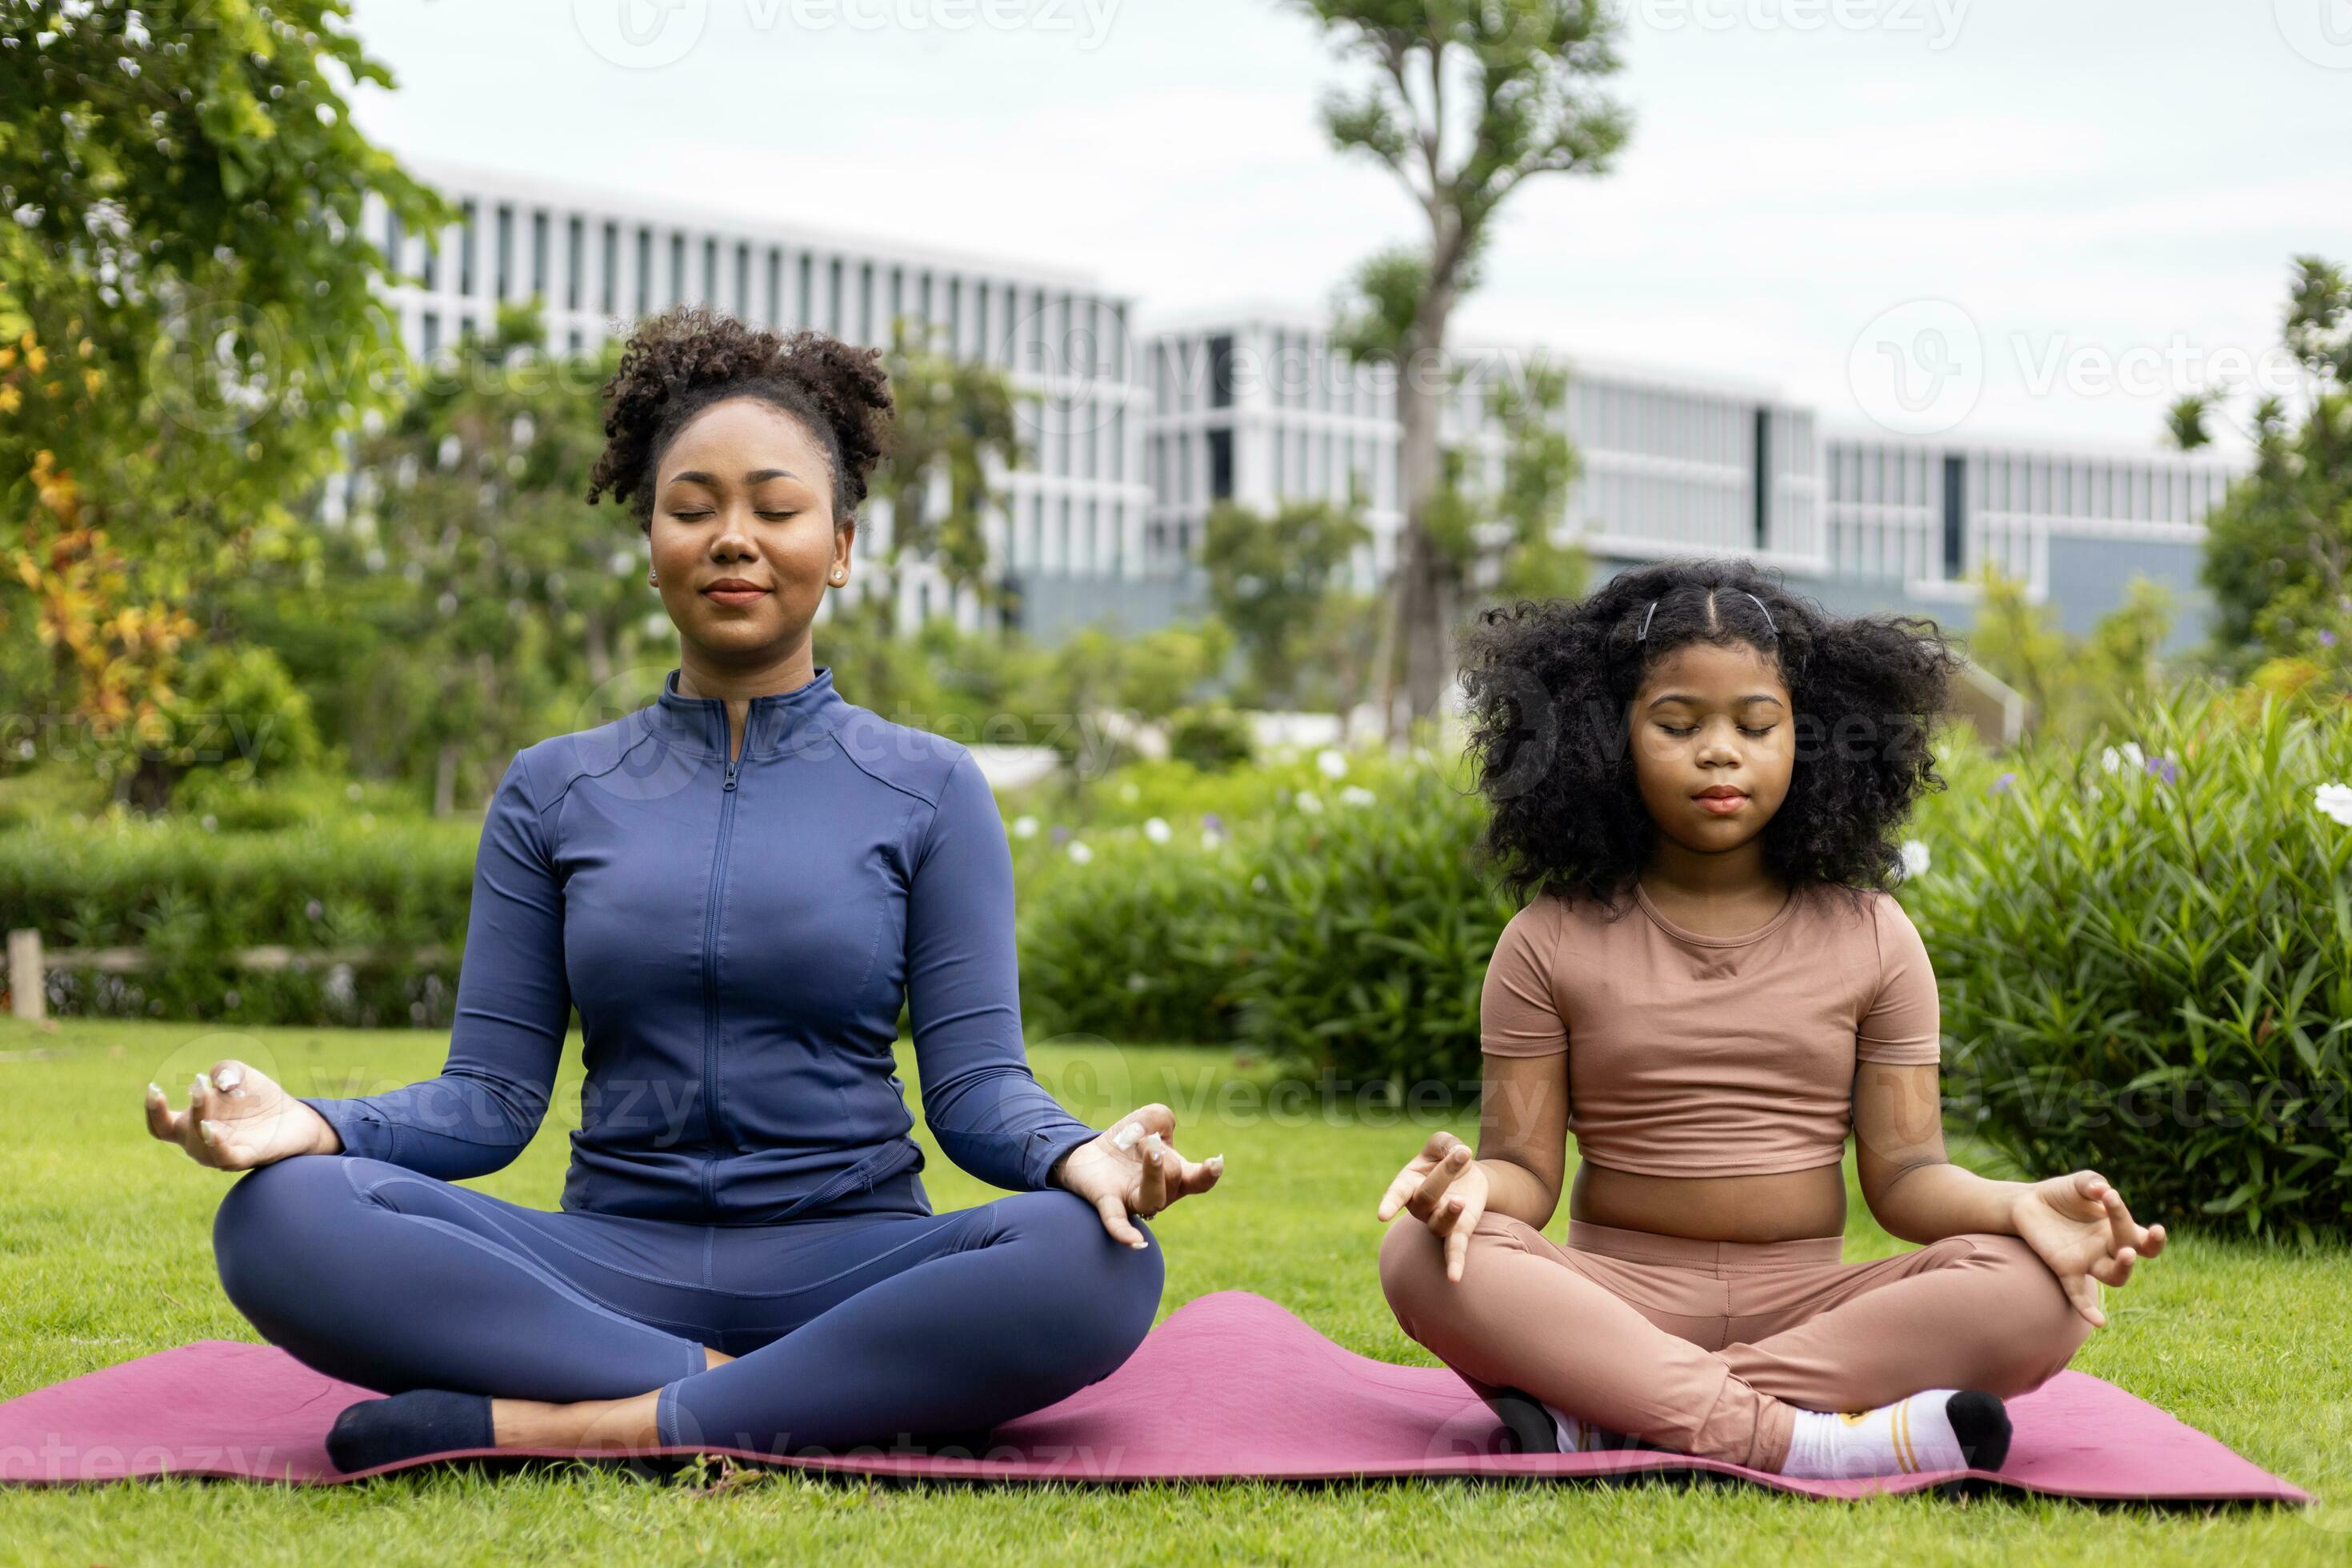 https://static.vecteezy.com/system/resources/previews/033/039/195/large_2x/african-american-woman-and-her-daughter-in-yoga-suit-are-relaxingly-practicing-meditation-exercise-in-the-park-to-attain-happiness-from-inner-peace-wisdom-for-healthy-mind-and-soul-concept-photo.jpg